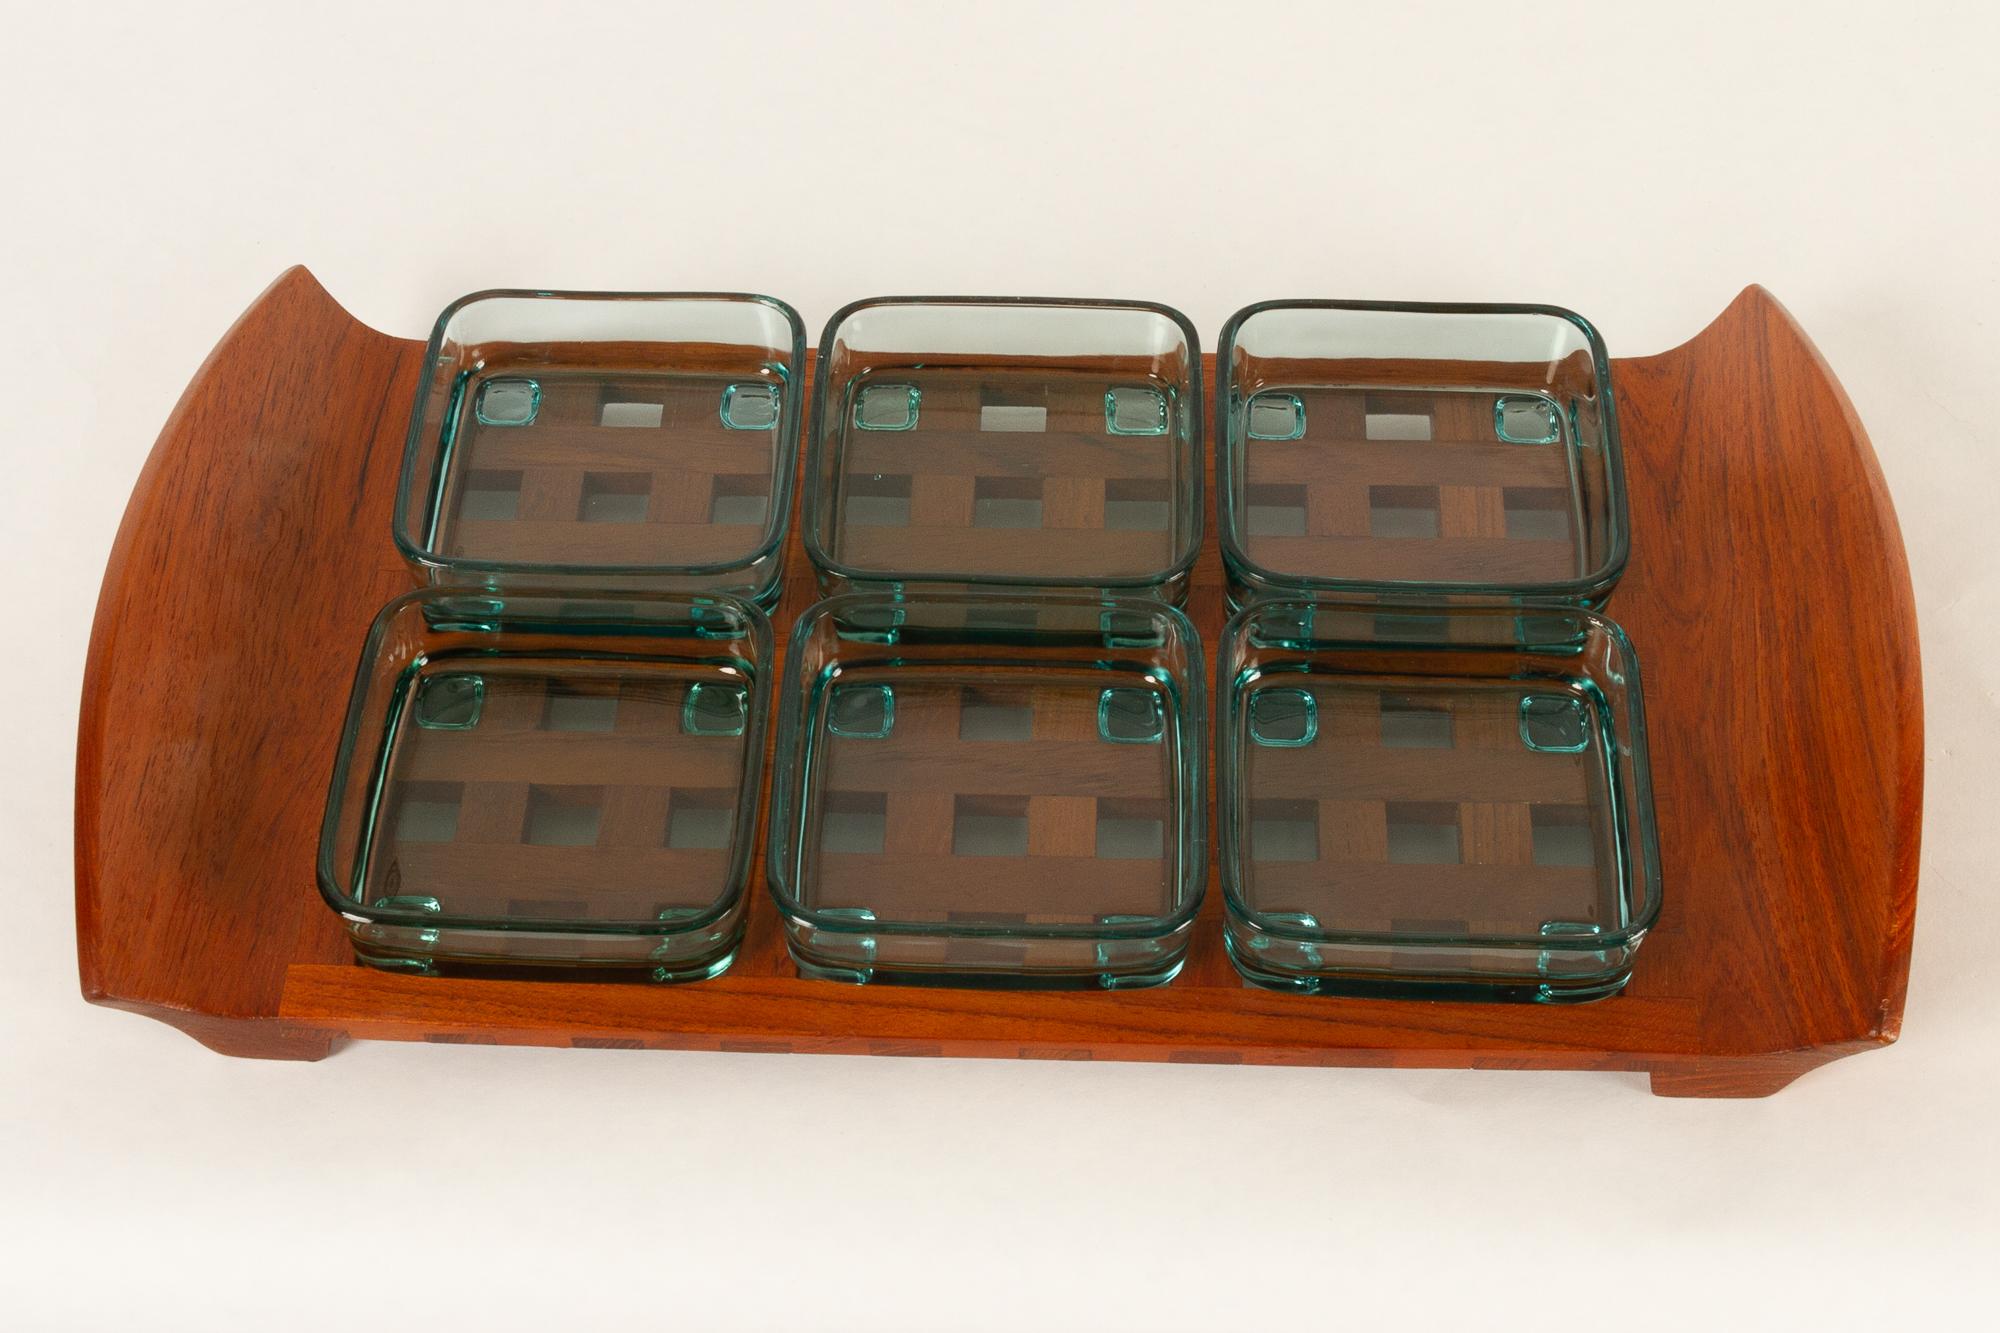 Mid-20th Century Vintage Danish Teak Tray with Glass Bowls by Jens Harald Quistgaard, 1960s